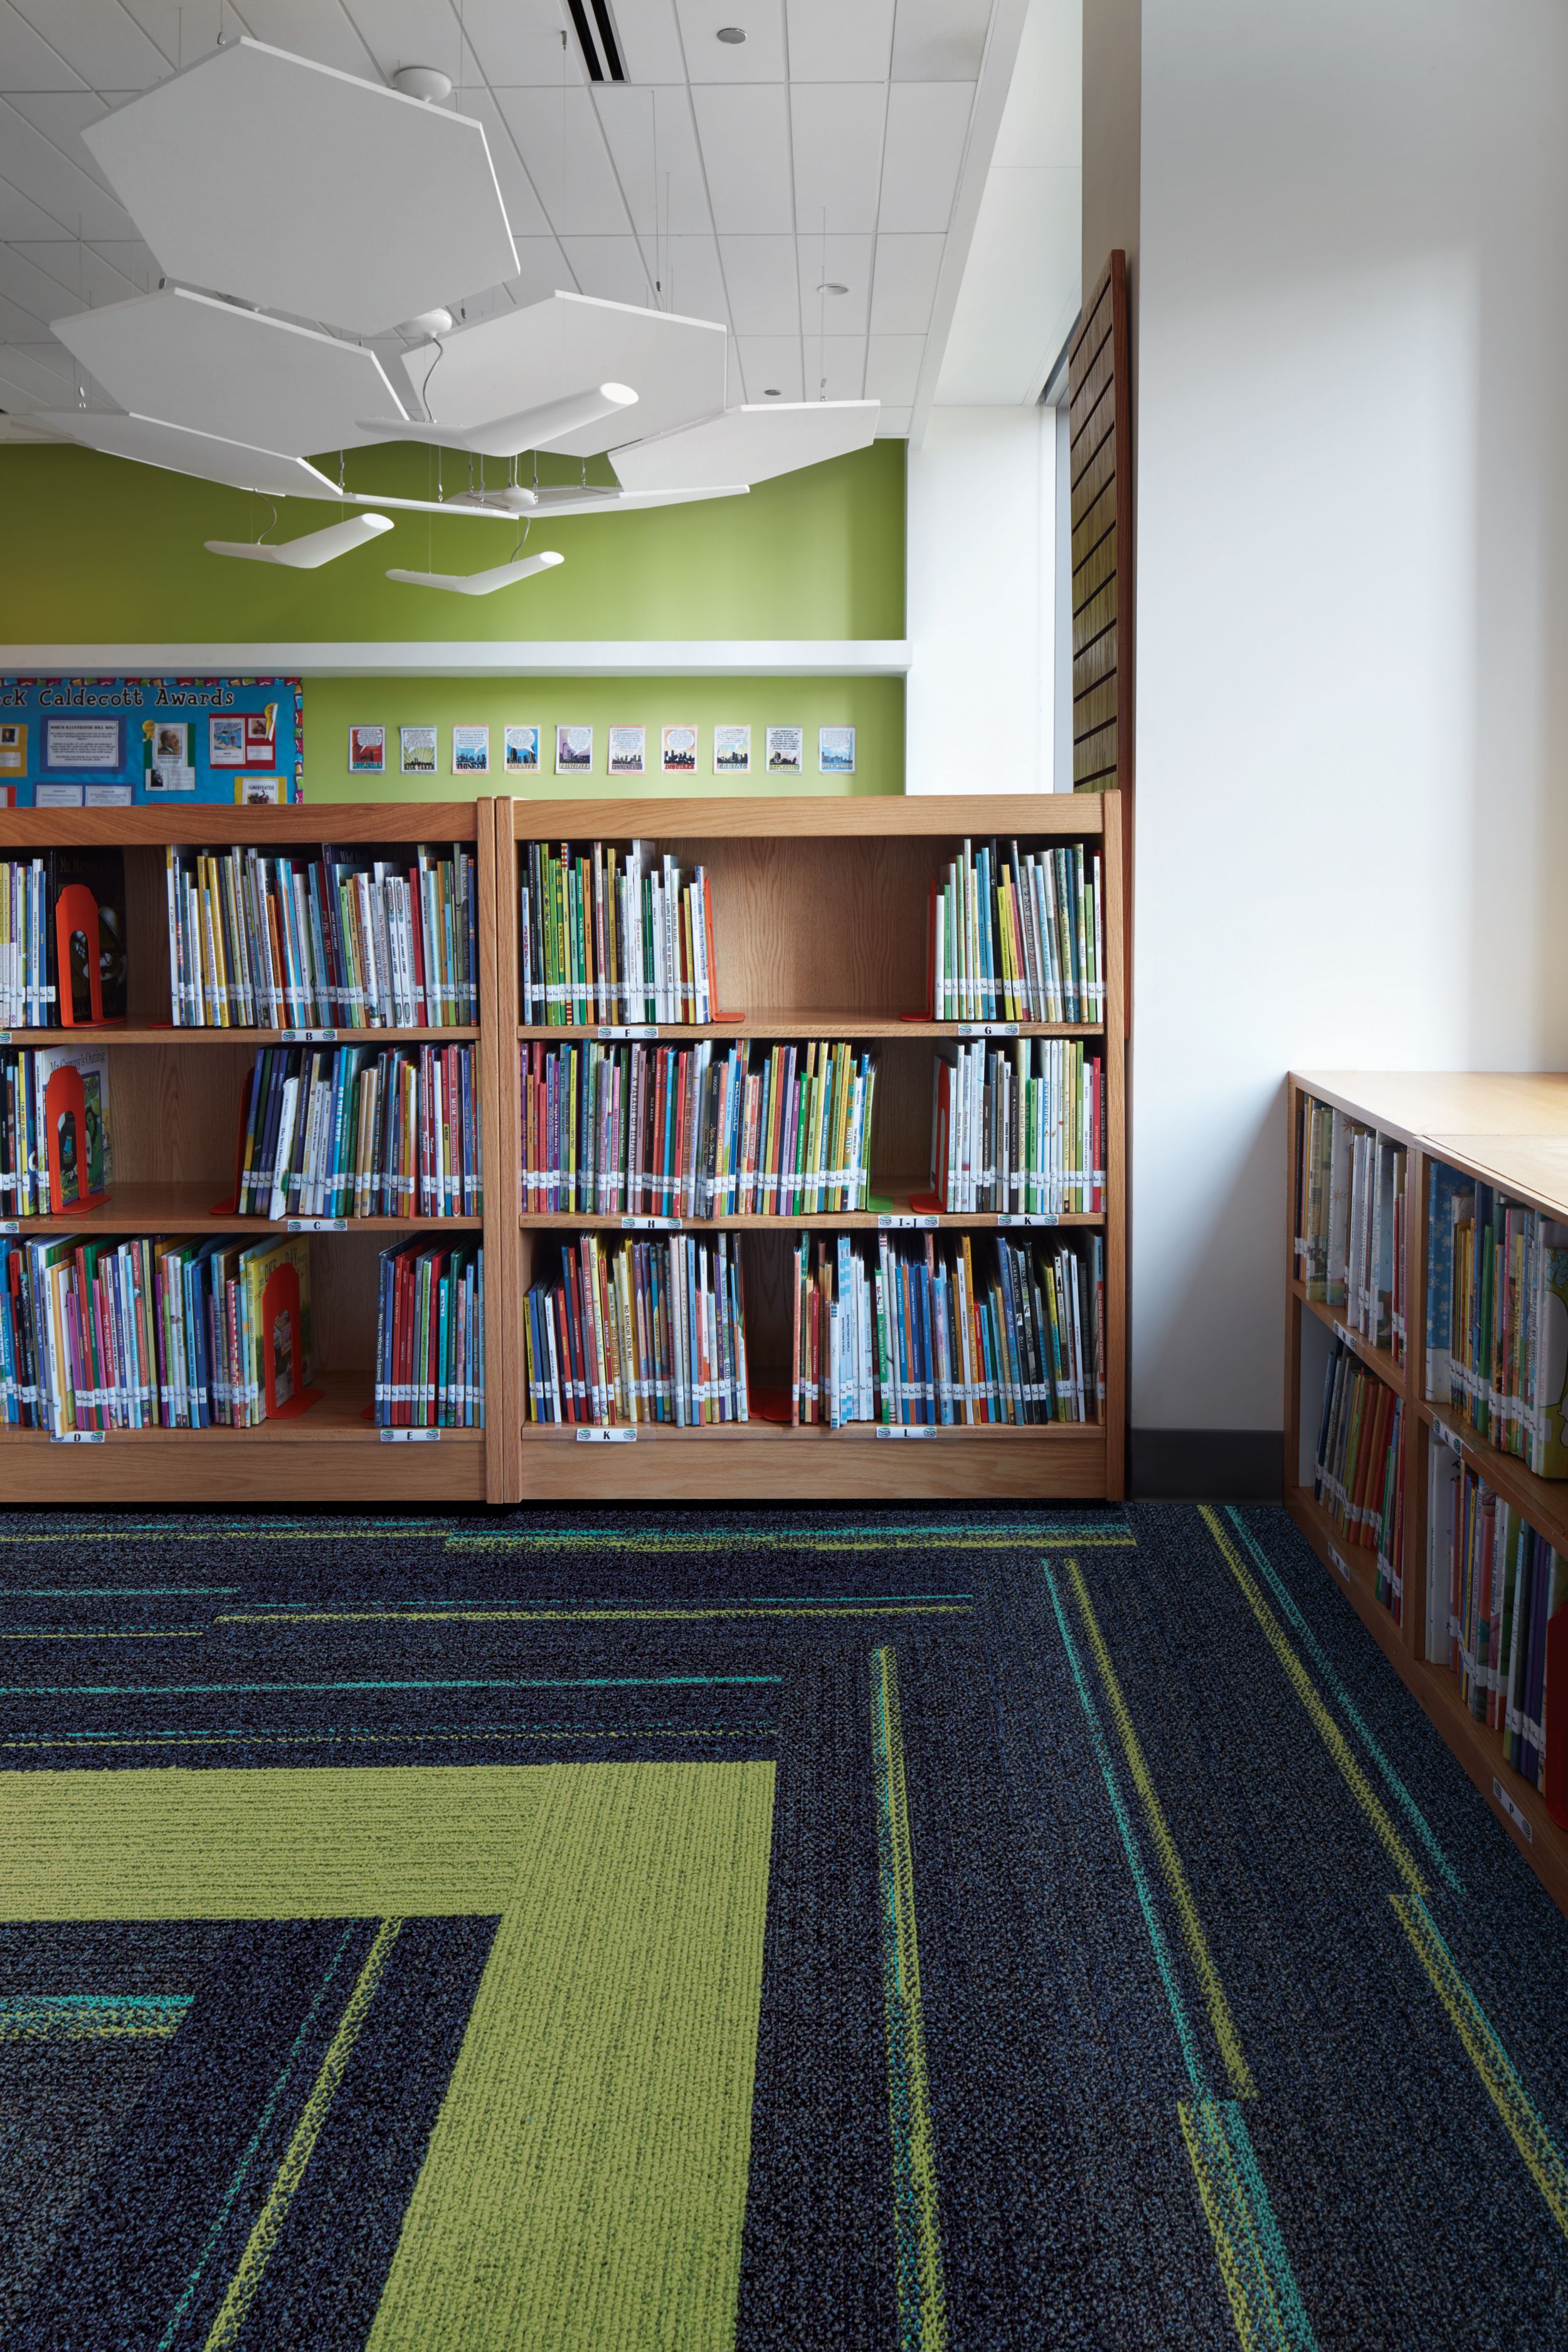 Interface Ground Waves and On Line plank carpet tile in corner of elementary school library imagen número 6